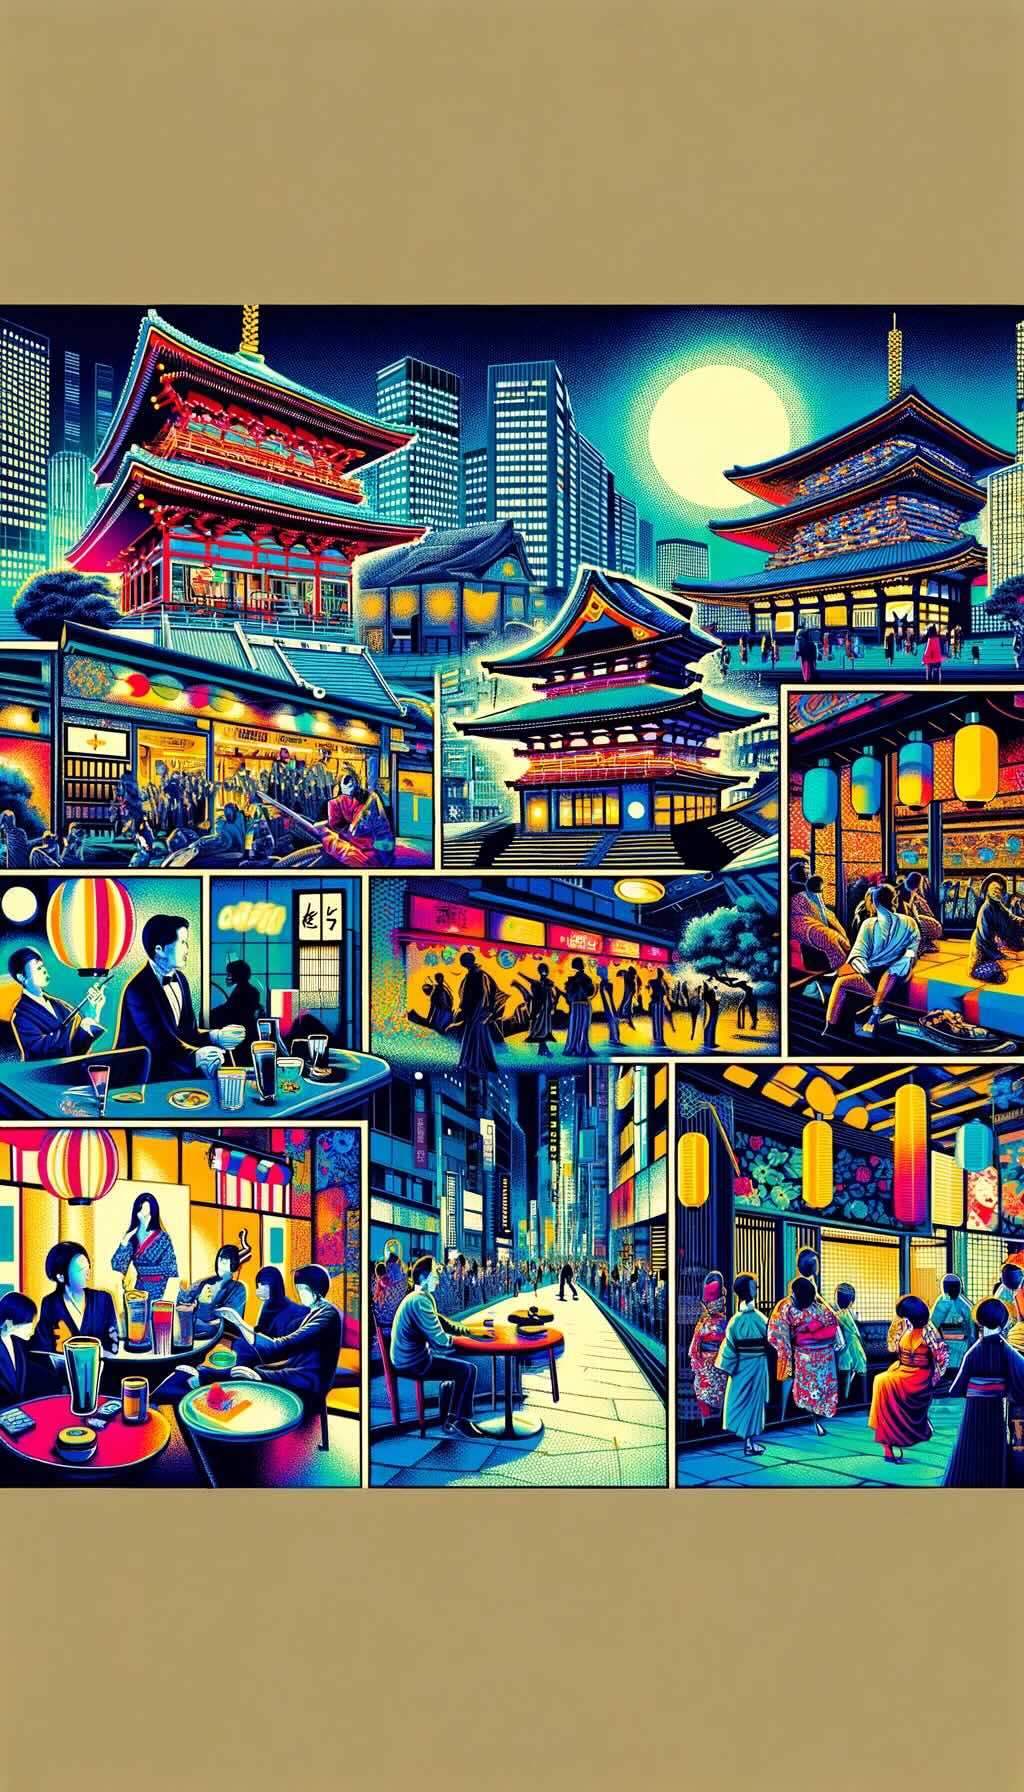 Essence of Tokyo's diverse nightlife scene showcases the variety of nocturnal experiences the city offers, including traditional arts performances, modern music acts, lively bars, and serene cultural spaces. The artwork reflects the city's unique blend of tradition and modernity, appealing to a wide range of tastes and interests, and mirrors the vibrant, colorful, and dynamic nature of Tokyo's nightlife